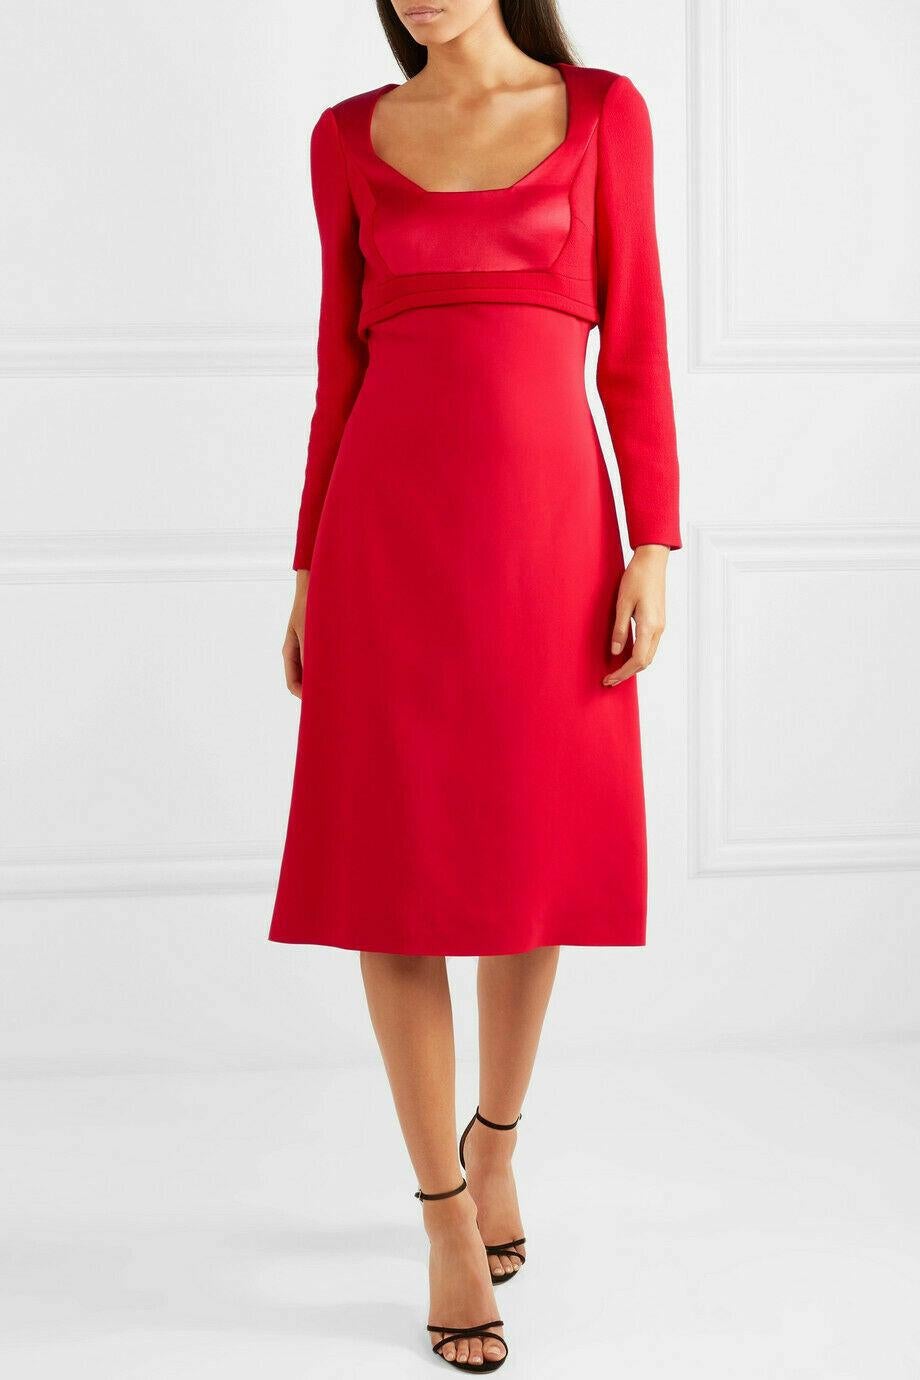 Antonio Berardi Fire Red midi dress.
 Antonio Berardi's dress is sophisticated and glamorous. 
Made from panels of wool-crepe, cady and satin and fully lined for a smooth fit.
Two-way zip fastening through back
Content:
Fabric 1: 97% viscose, 3%